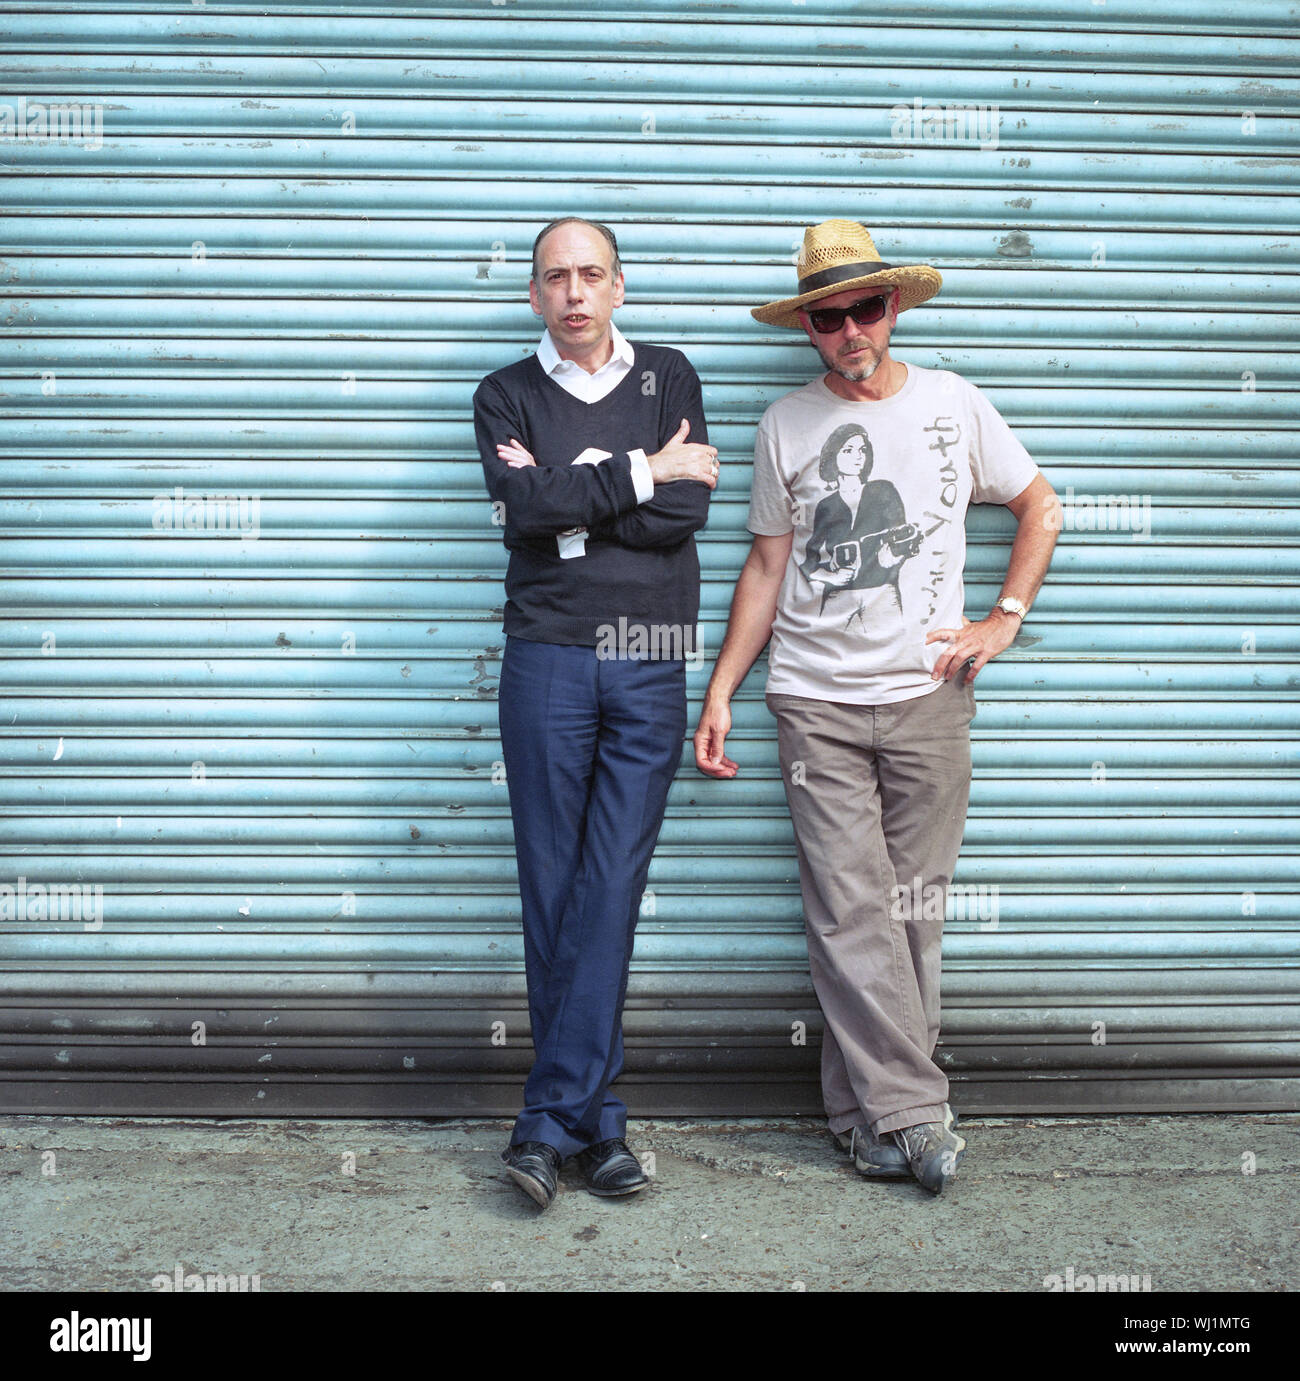 Carbon/Silicon, English musical duo consisting of Mick Jones and Tony James photographed in Acton, London, England, U.K Stock Photo